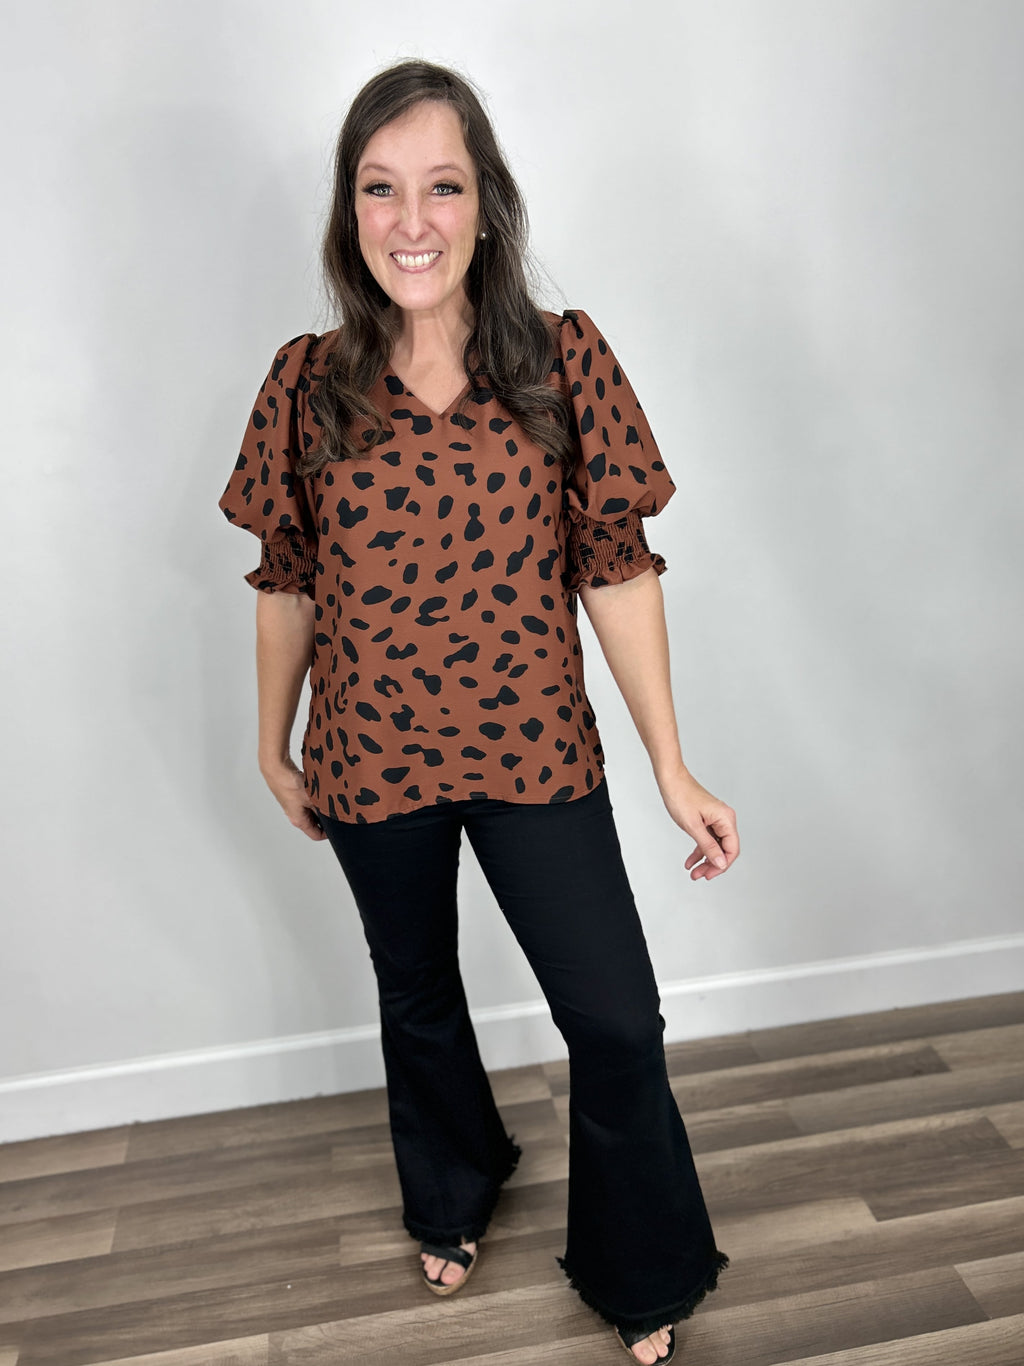 Tiffany Short Sleeve Animal Print Top main outfit paired with black flare pants.